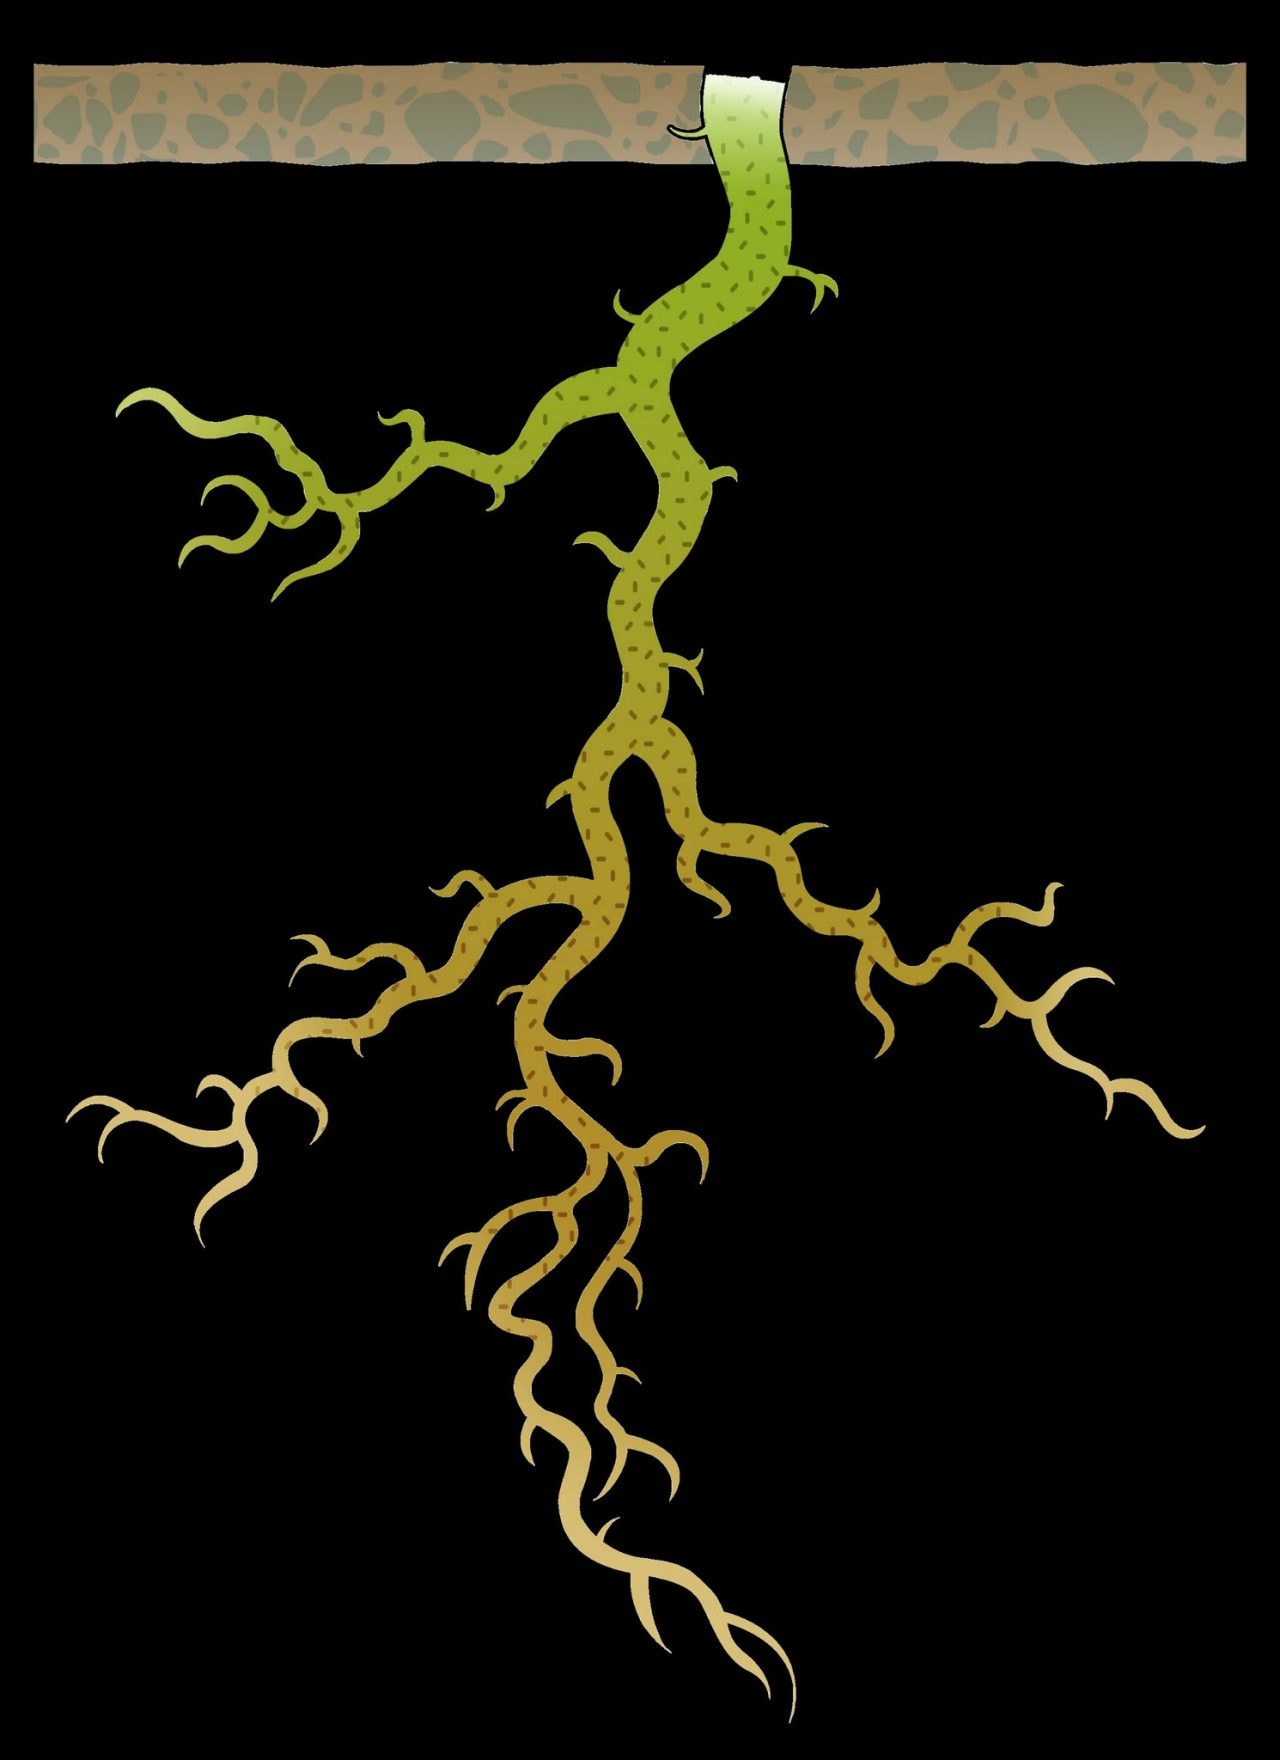 Illustration of tobacco's plant root.